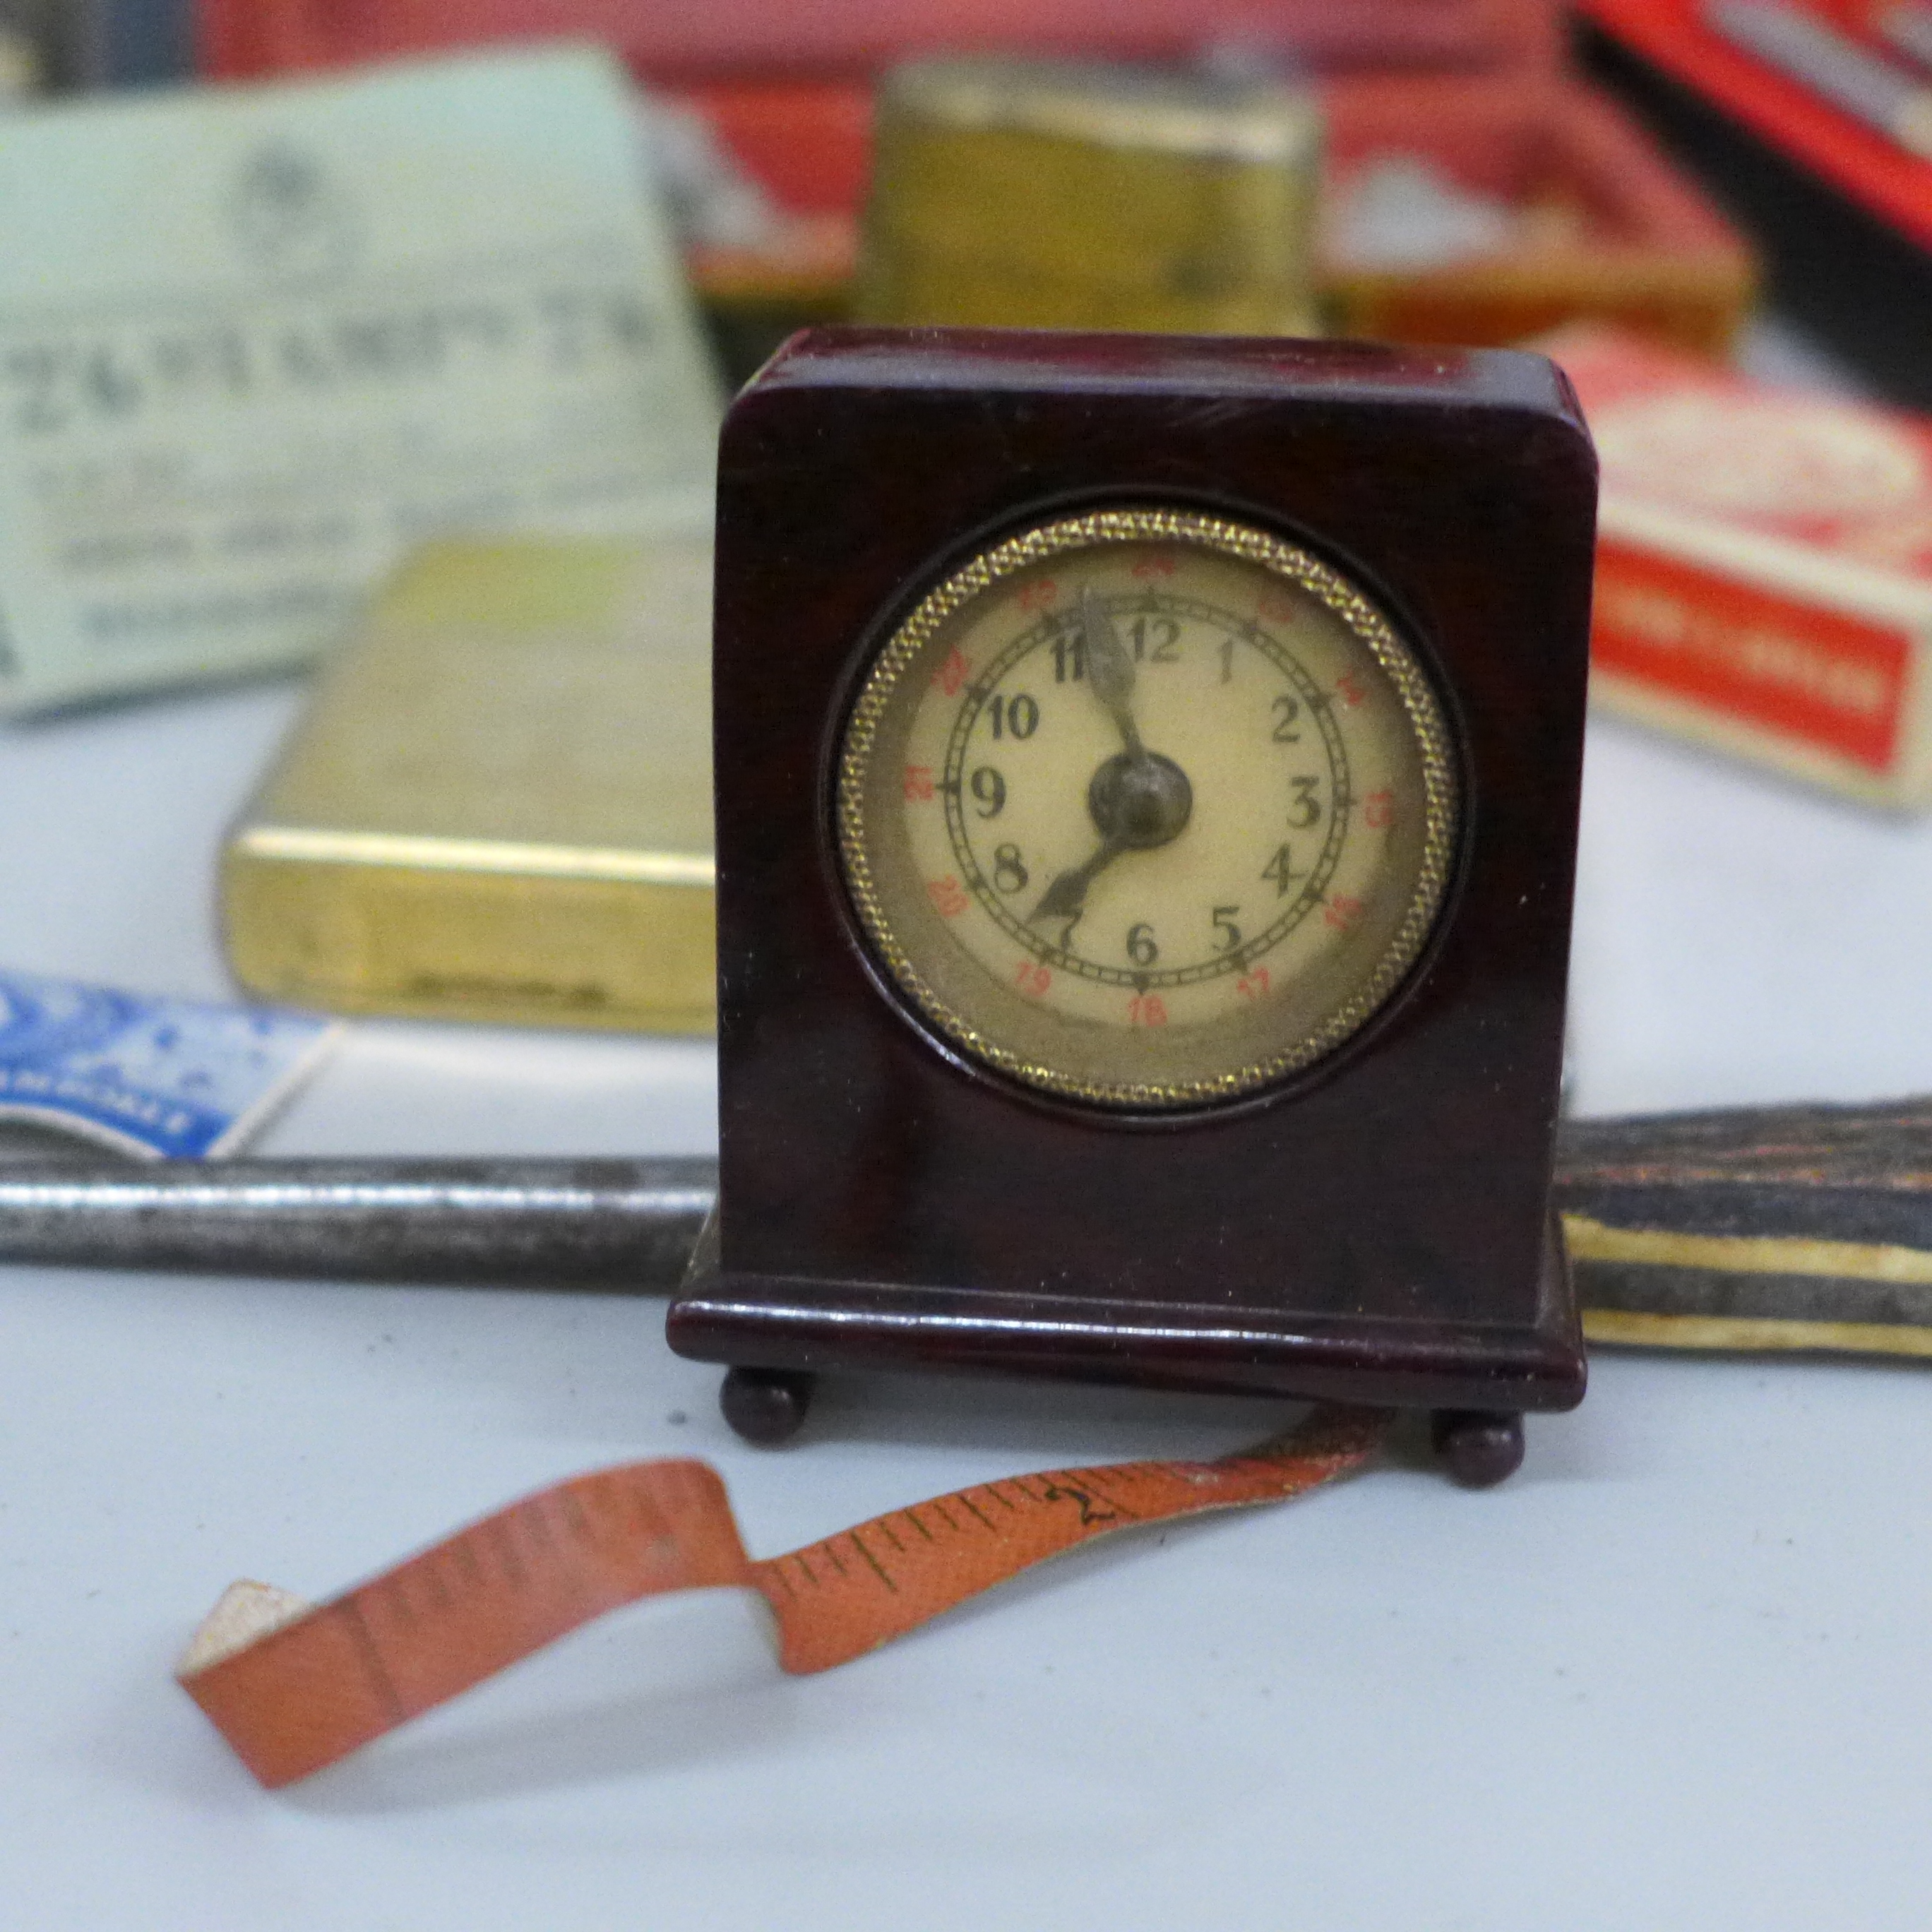 A novelty Bakelite clock read out tape measure, lighters, a travel inkwell, two Georgian buckles, - Image 7 of 7